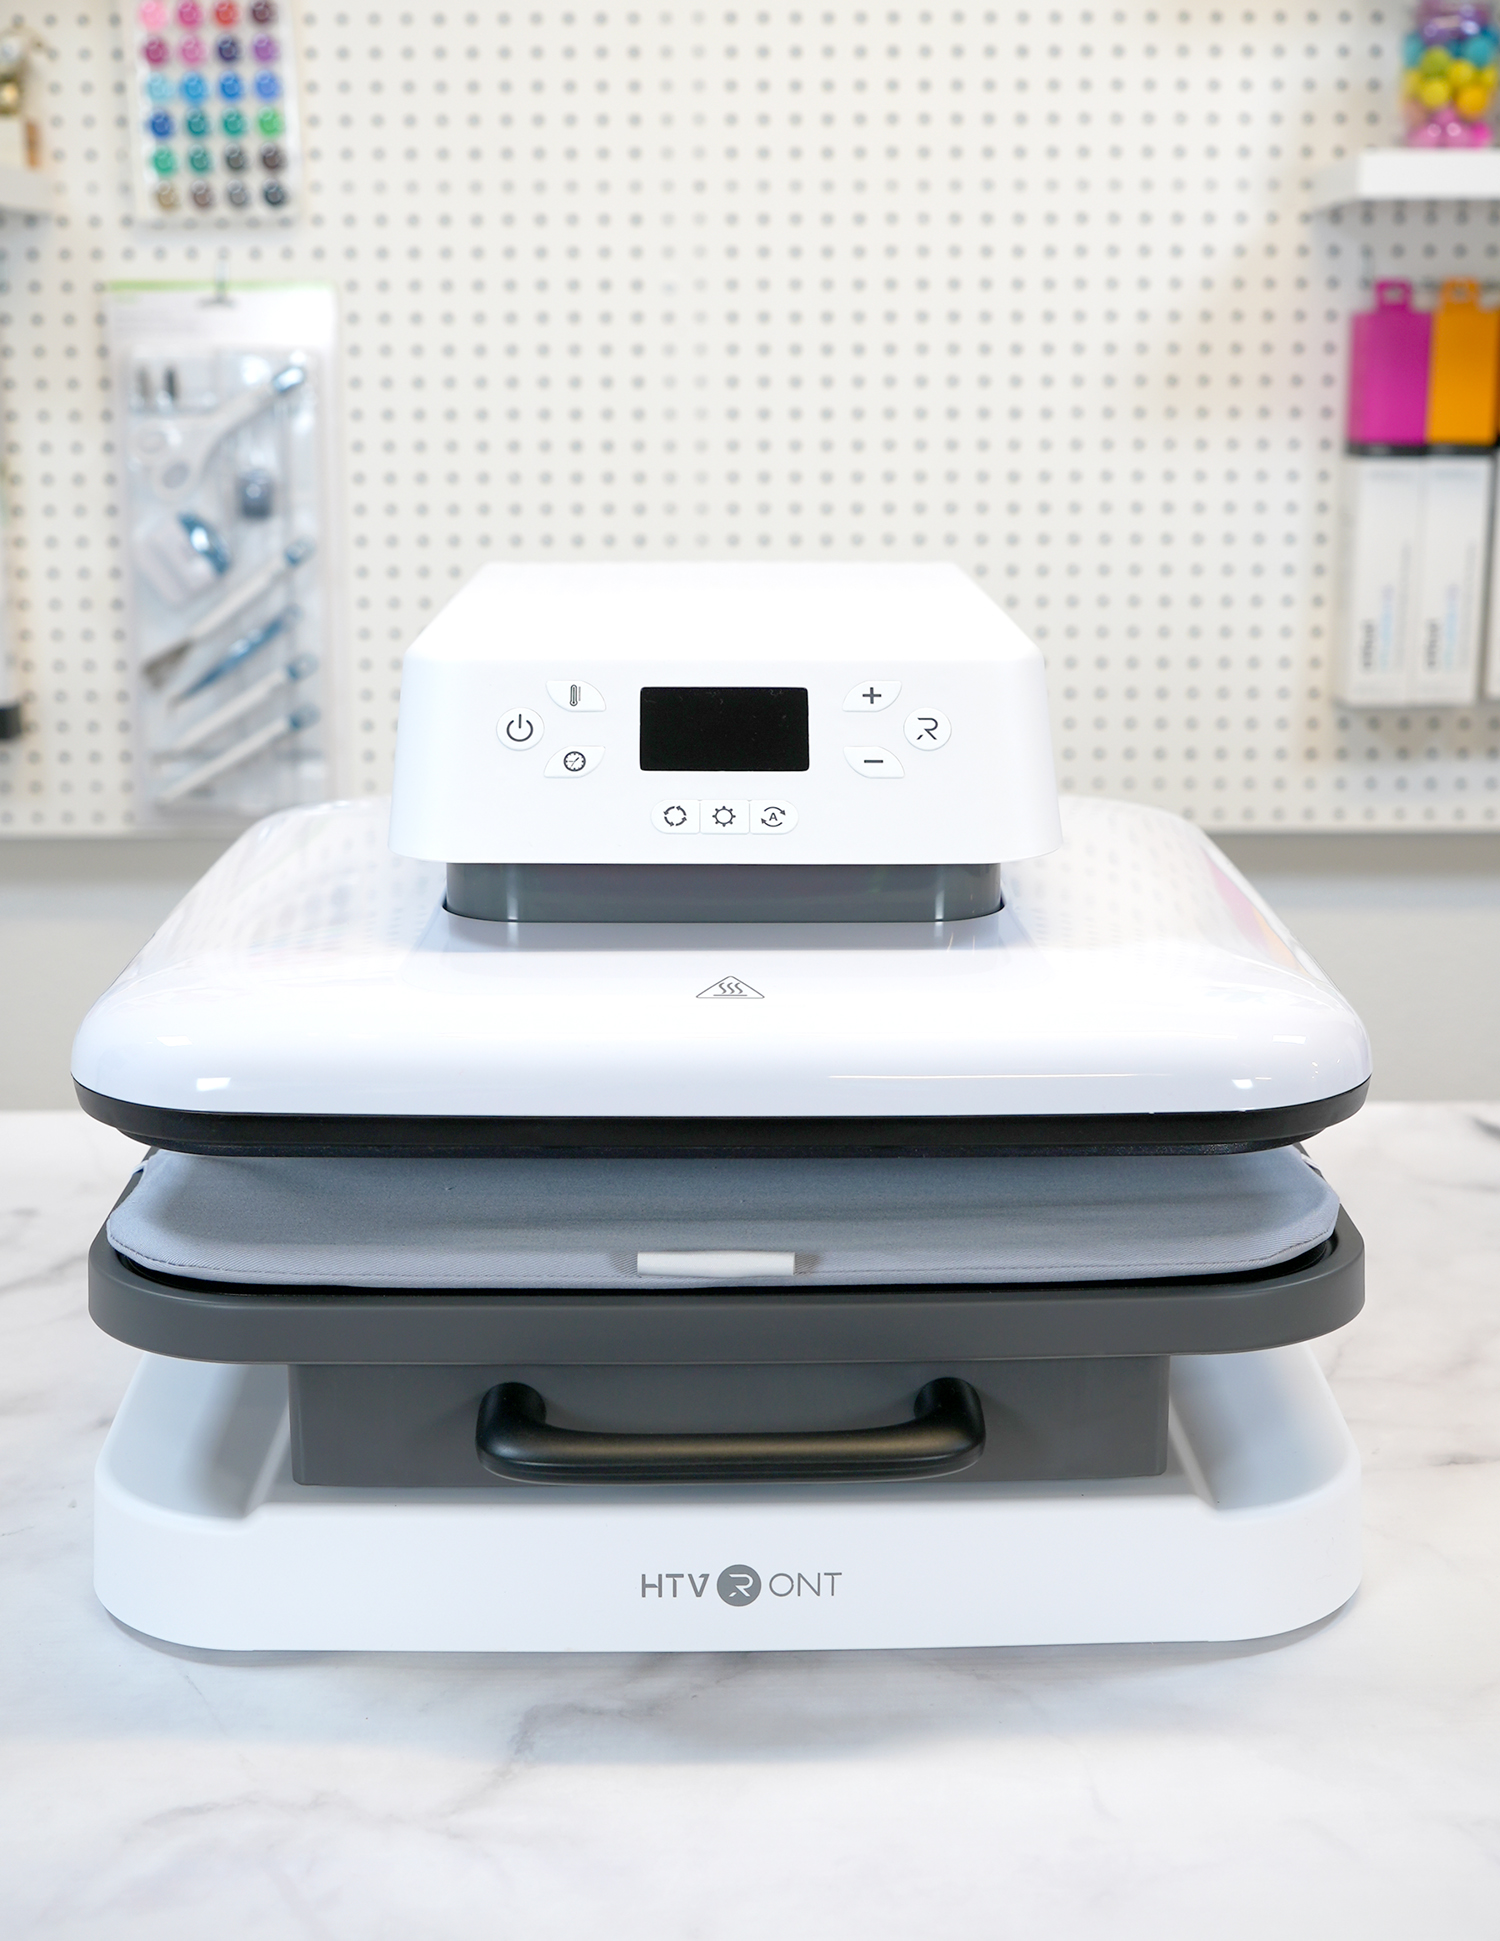 HTVRONT Auto Heat Press Review - The Craft Chaser